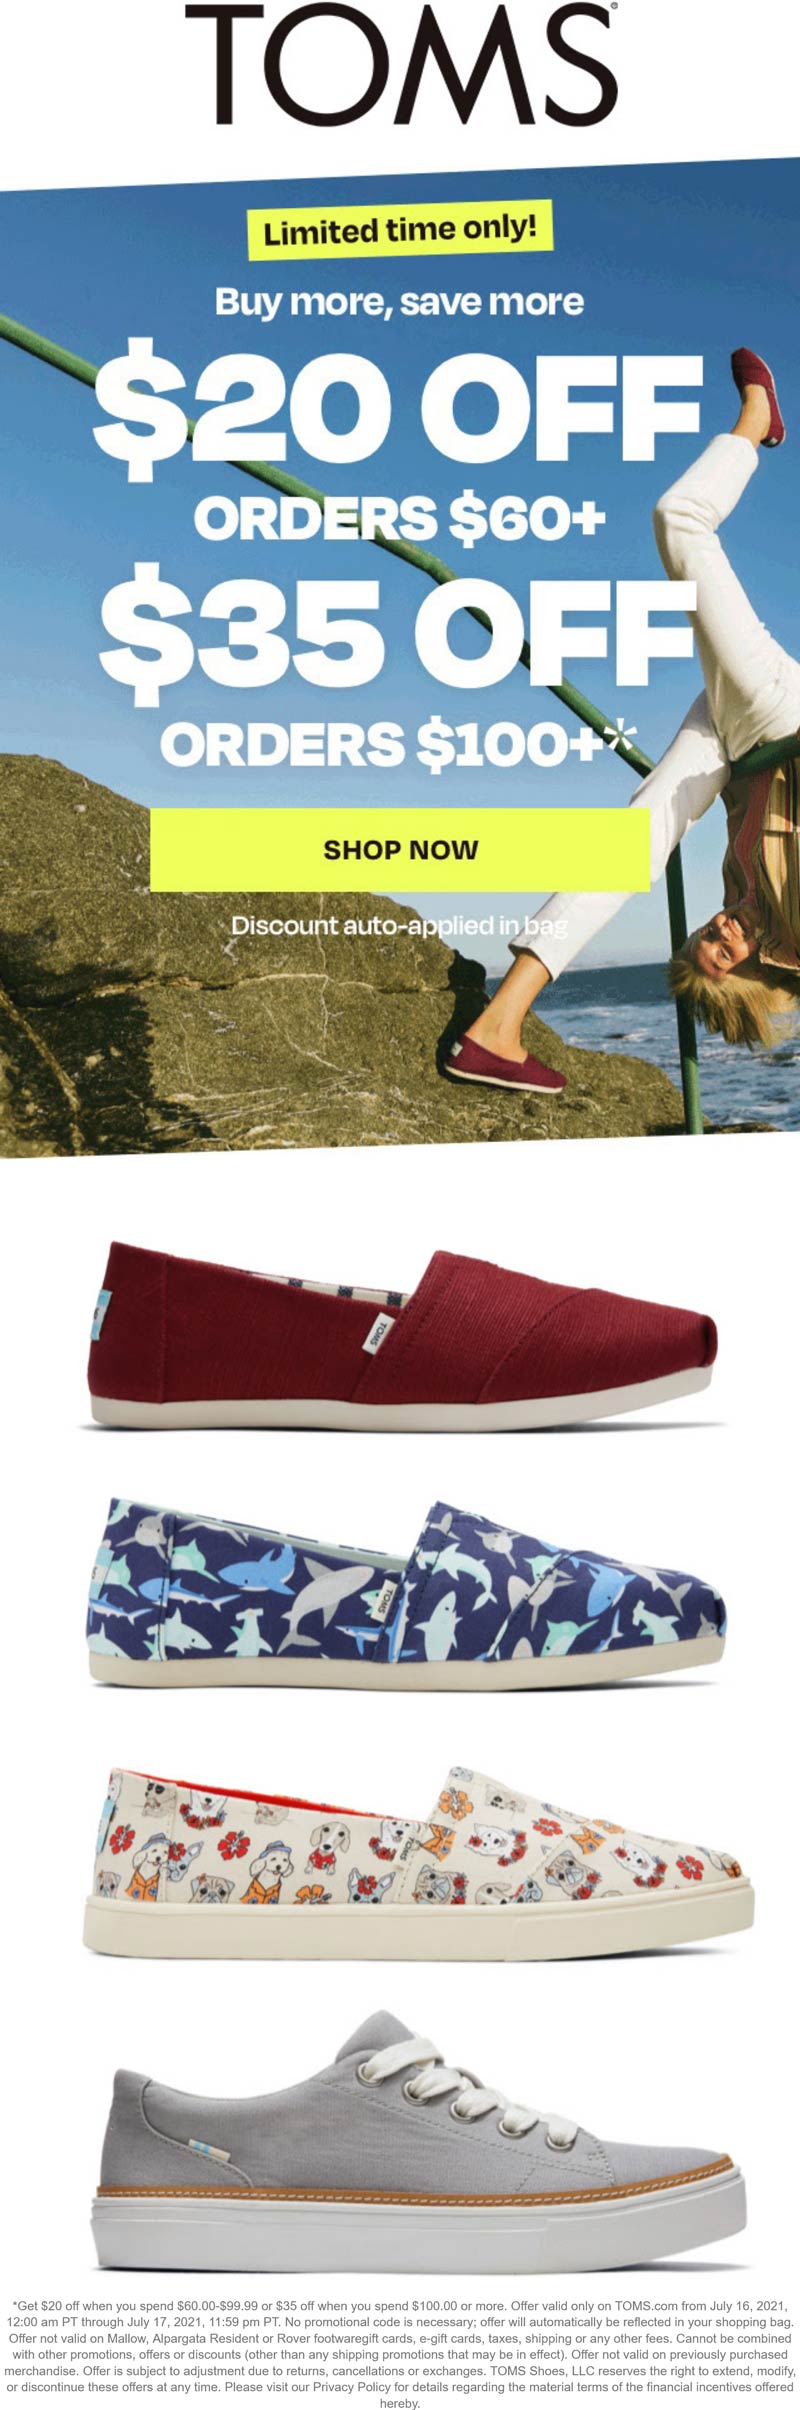 TOMS stores Coupon  $20-$35 off $60+ at TOMS shoes #toms 